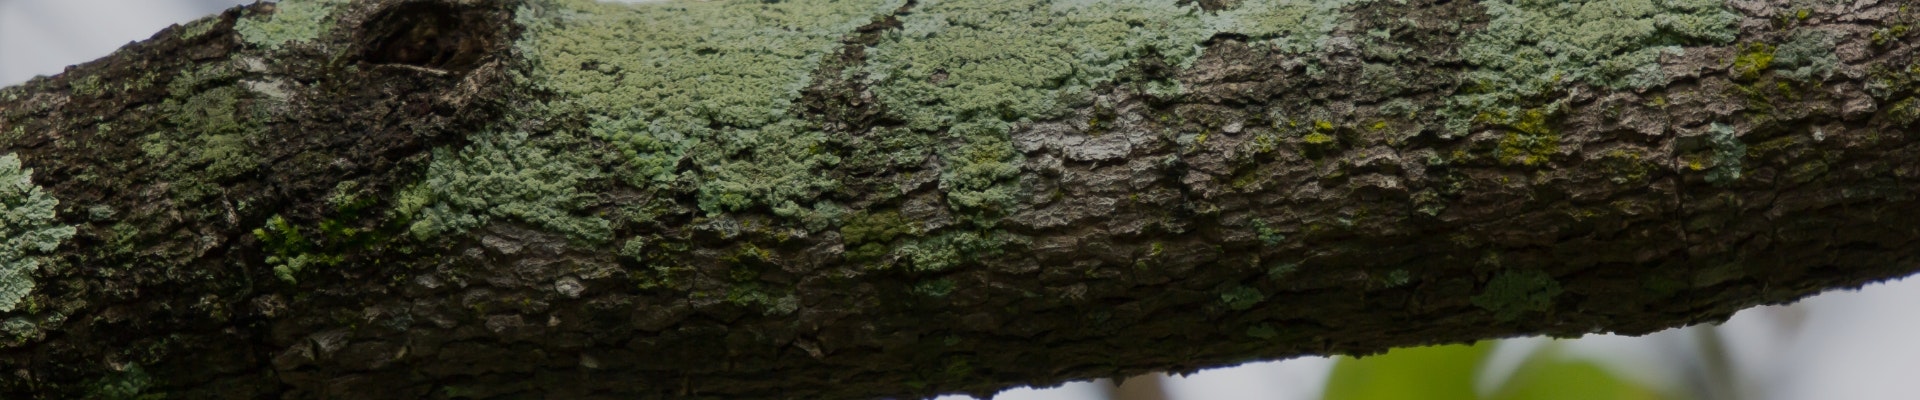 Image of branch with moss growing on it.